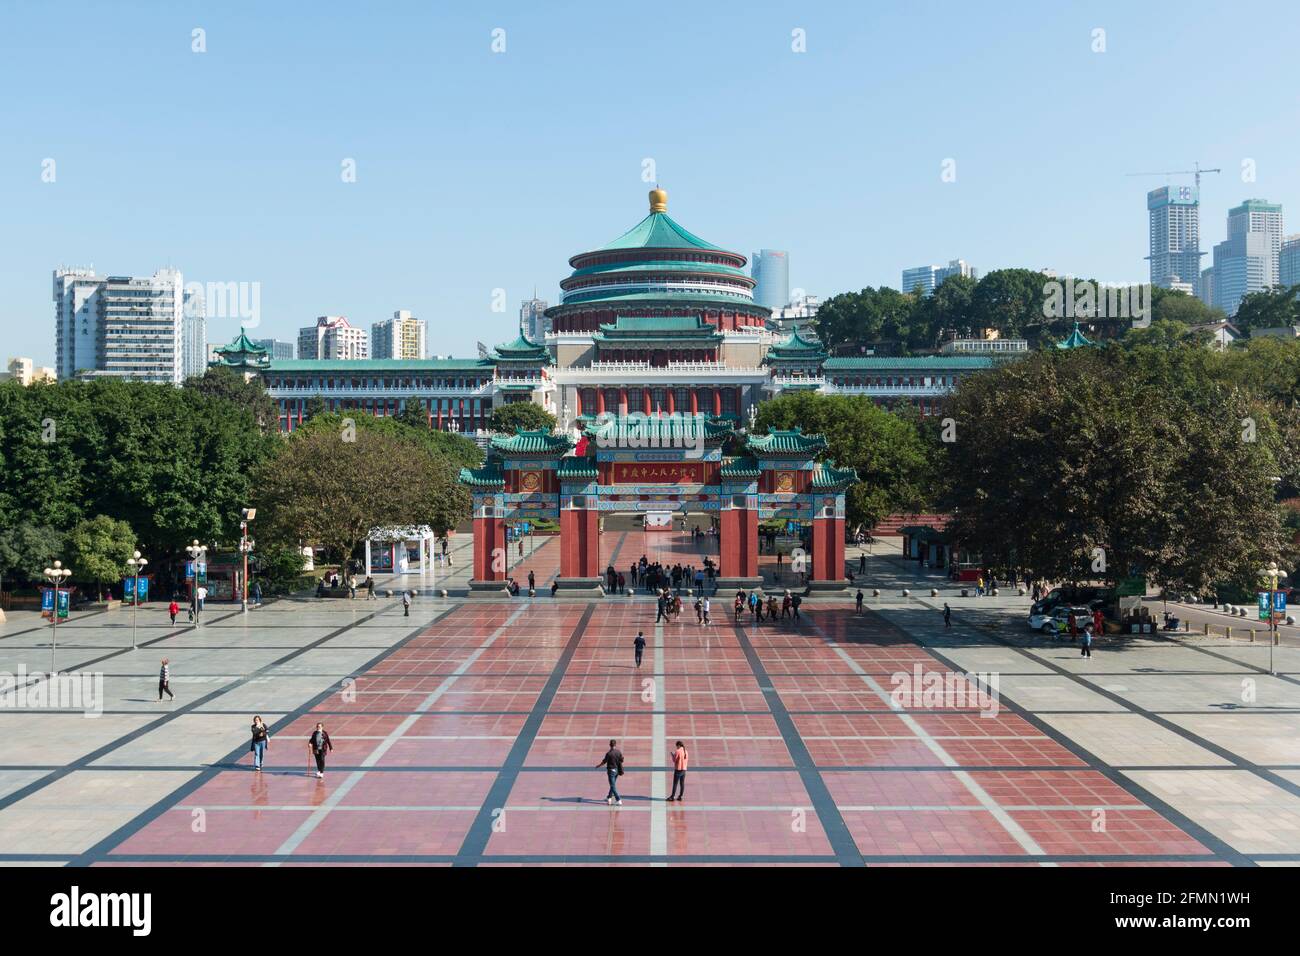 March 1, 2021 - Chongqing - China: Day view of the Great Hall of the People and People's Square Stock Photo